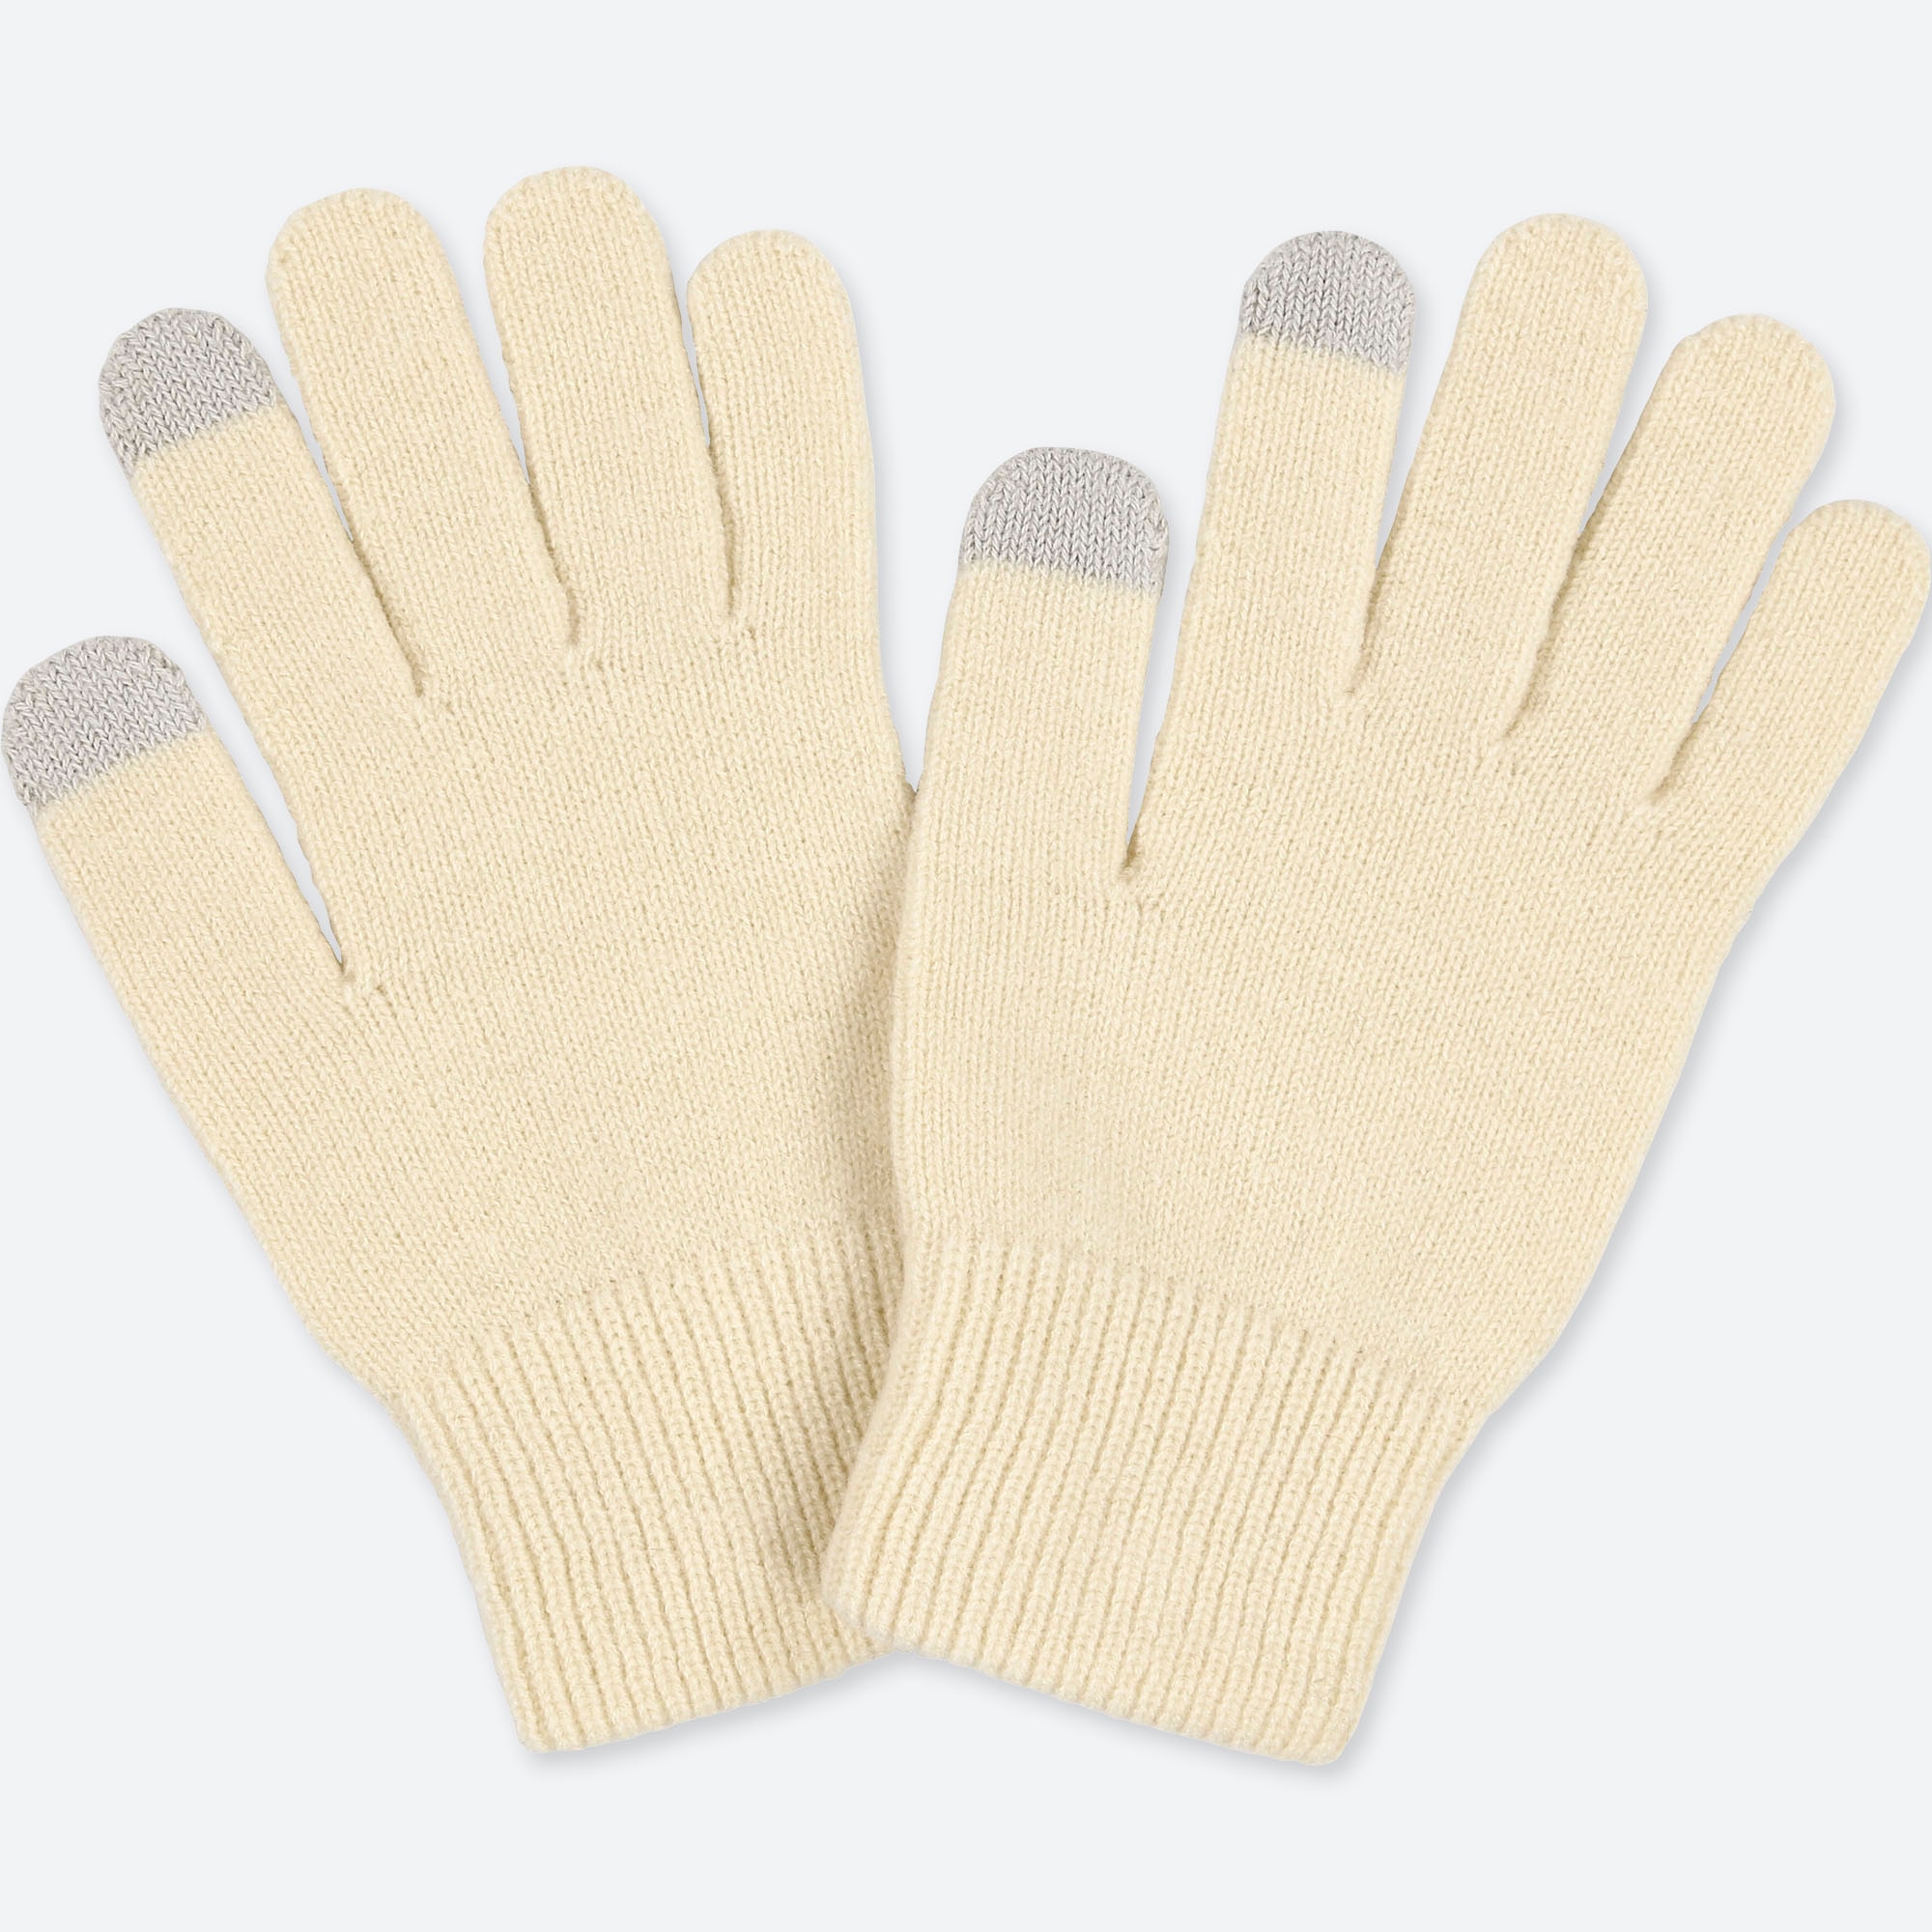 Silverline Yellow Gripper Gloves Knitted Cotton AP349760 One Size 